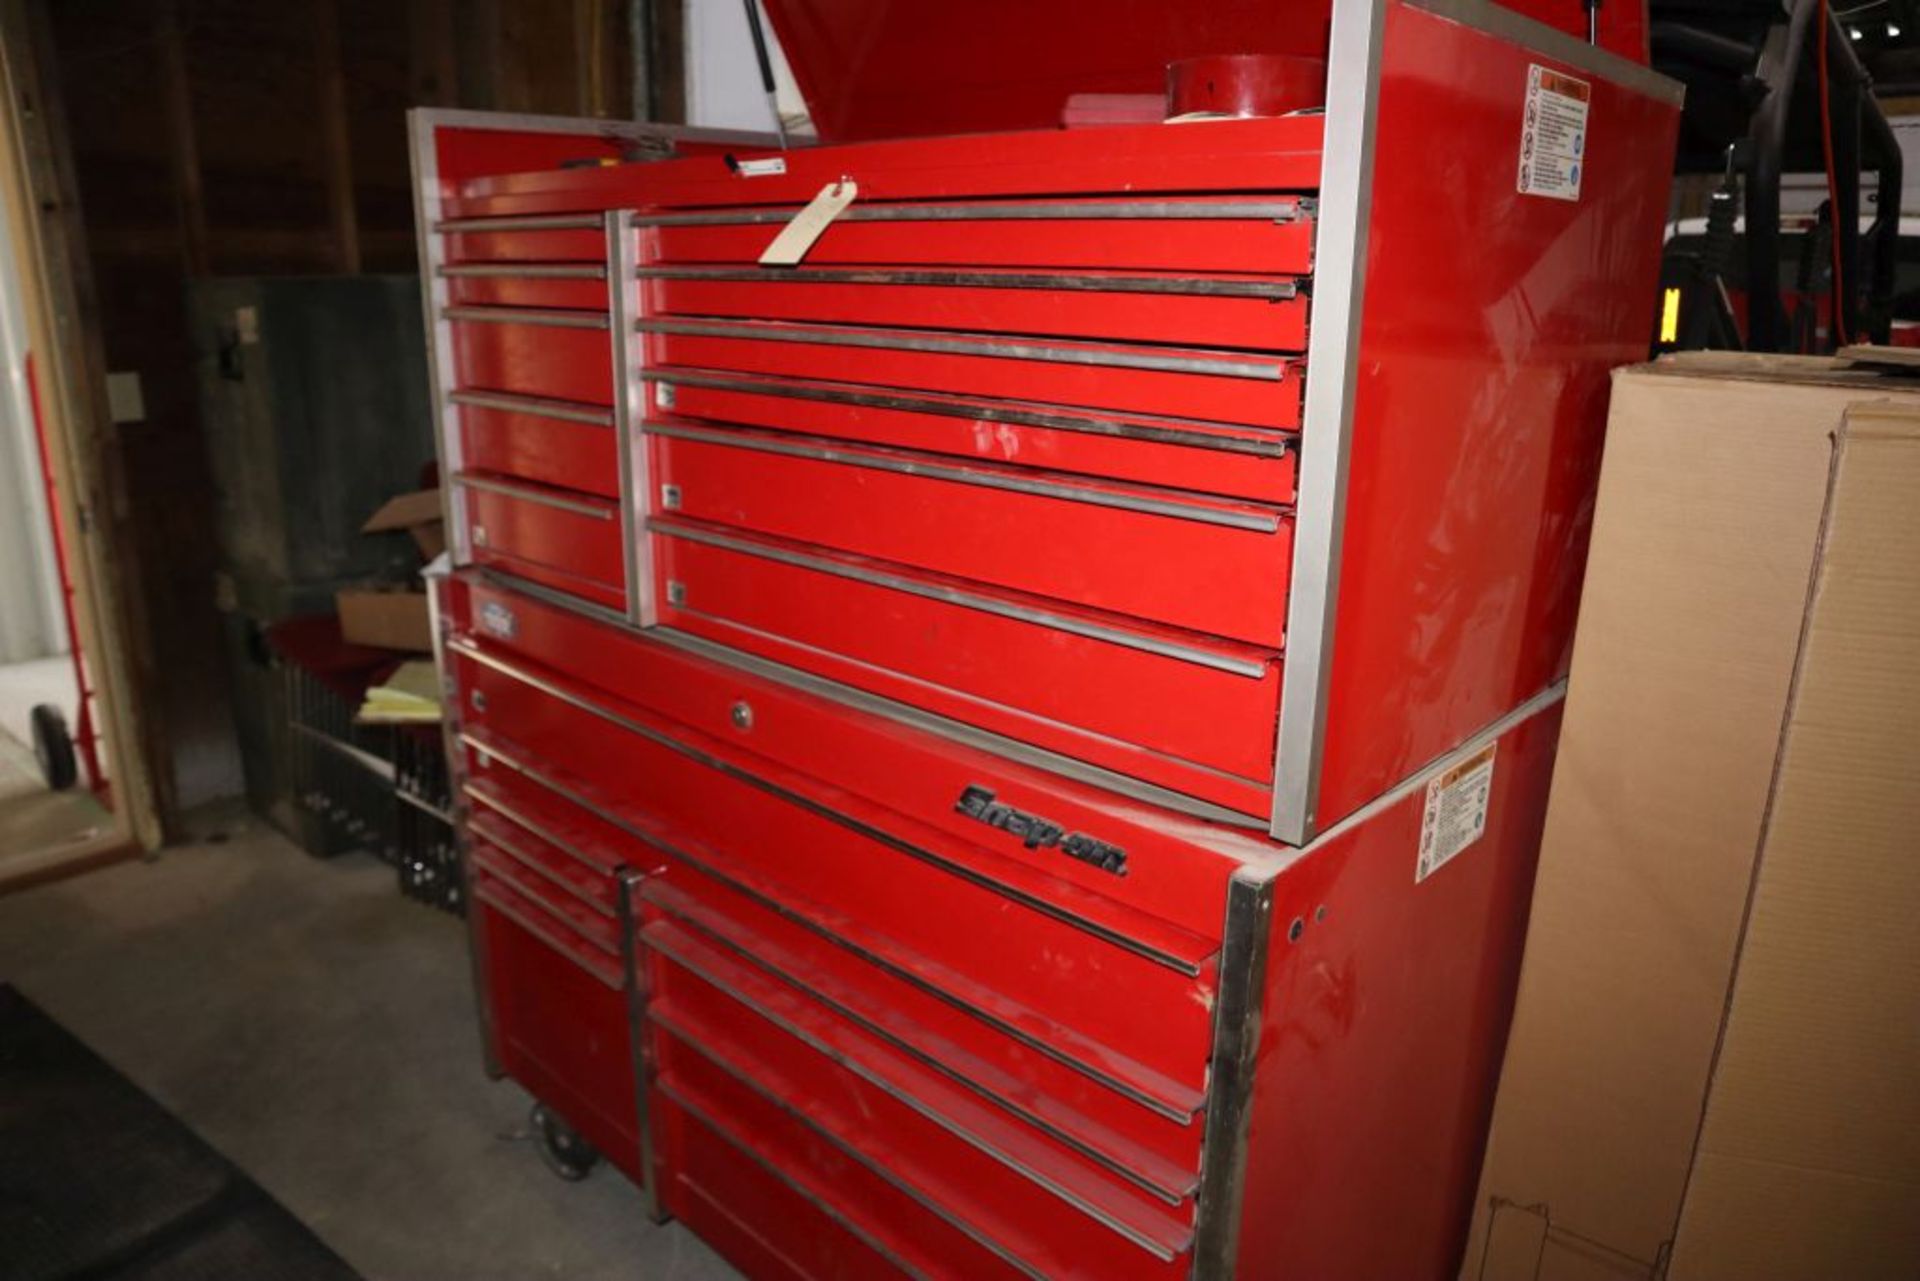 Snap-On tool chest on wheels w/ tools.